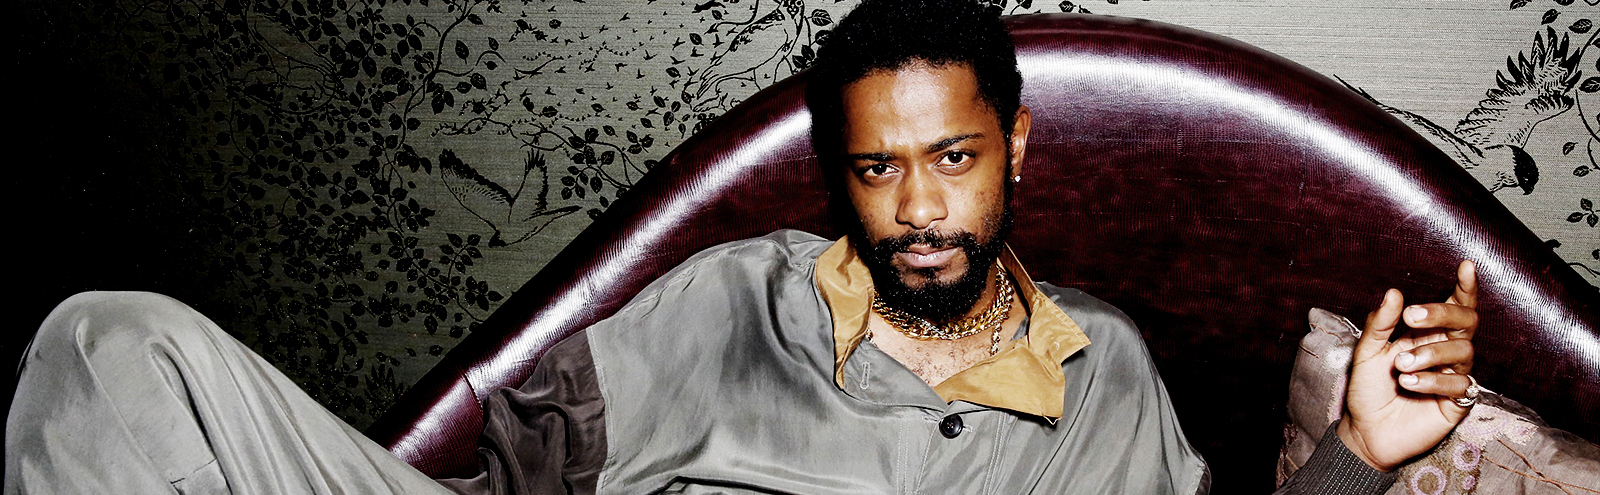 LaKeith Stanfield On Finding Empathy In A ‘Reprehensible’ Character In ‘Judas And The Black Messiah’